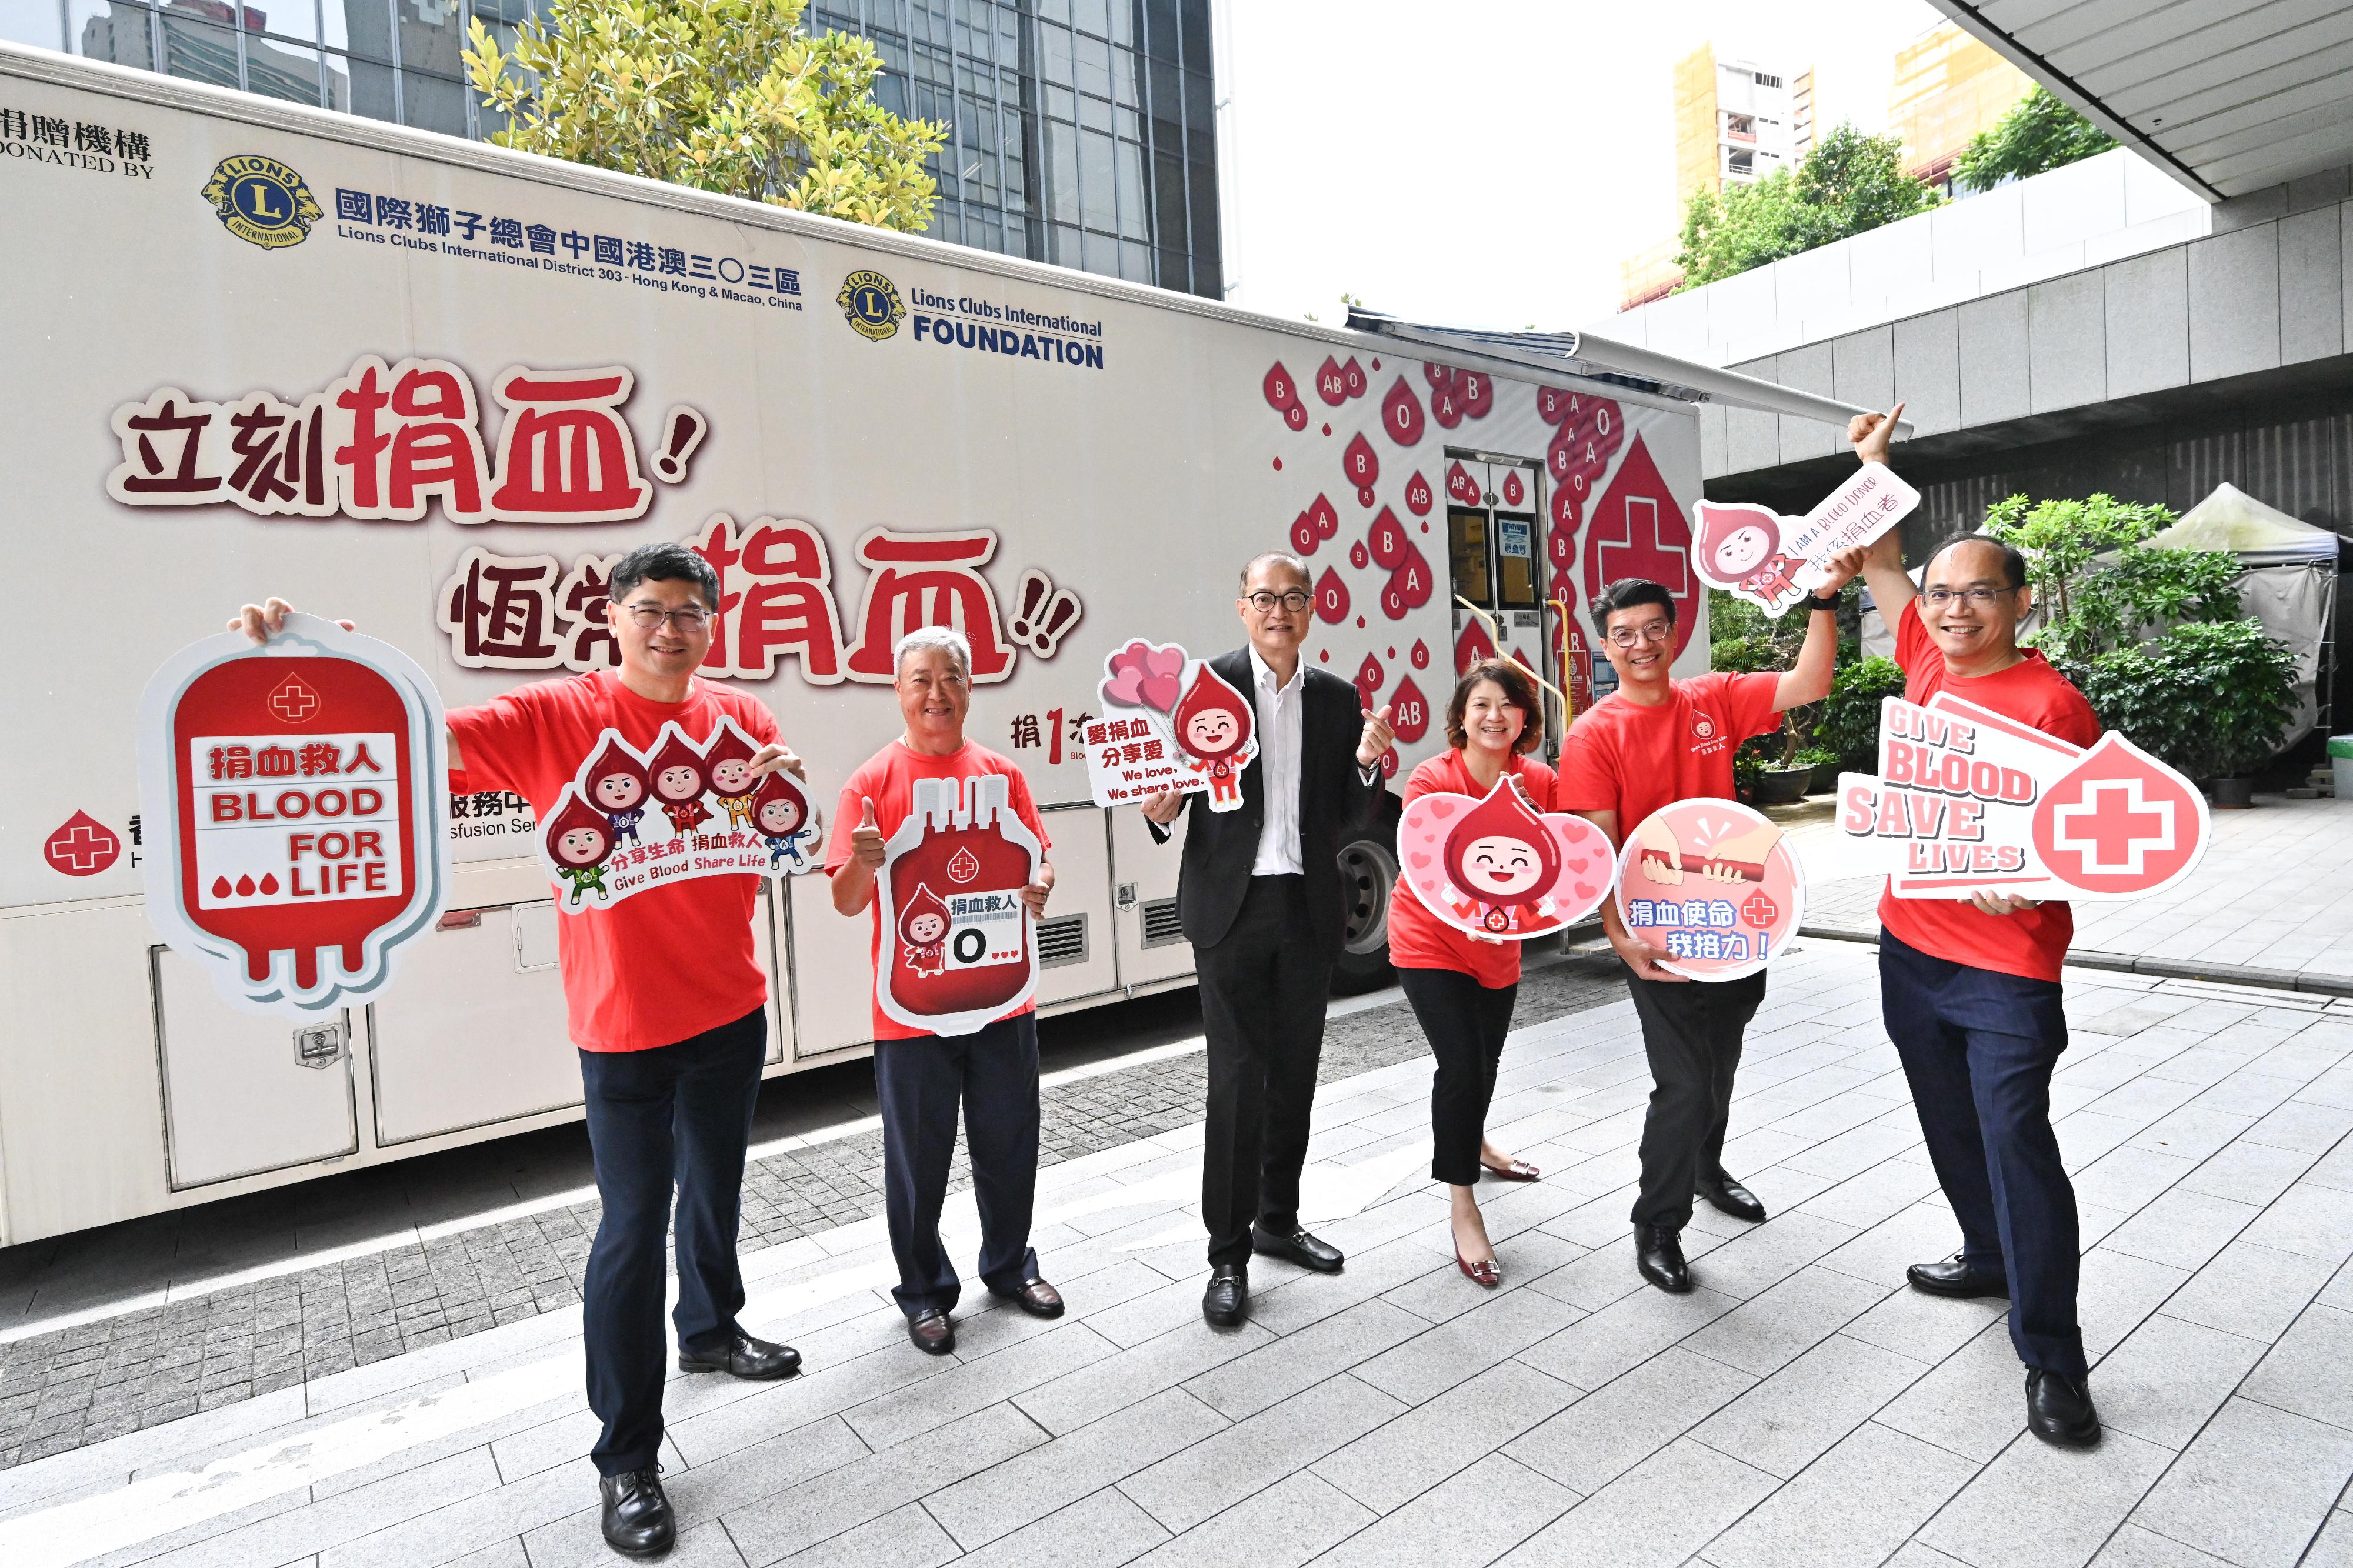 The Secretary for Health, Professor Lo Chung-mau (third left); the Under Secretary for Health, Dr Libby Lee (third right); the Commissioner for Primary Healthcare, Dr Pang Fei-chau (second right); and the Chief Executive of the Hospital Authority, Dr Tony Ko (first left), donated blood on the mobile blood donation vehicle of the Hong Kong Red Cross Blood Transfusion Service (BTS) parked at the Central Government Offices today (August 14) to support in person blood donation drives and efforts of the BTS.